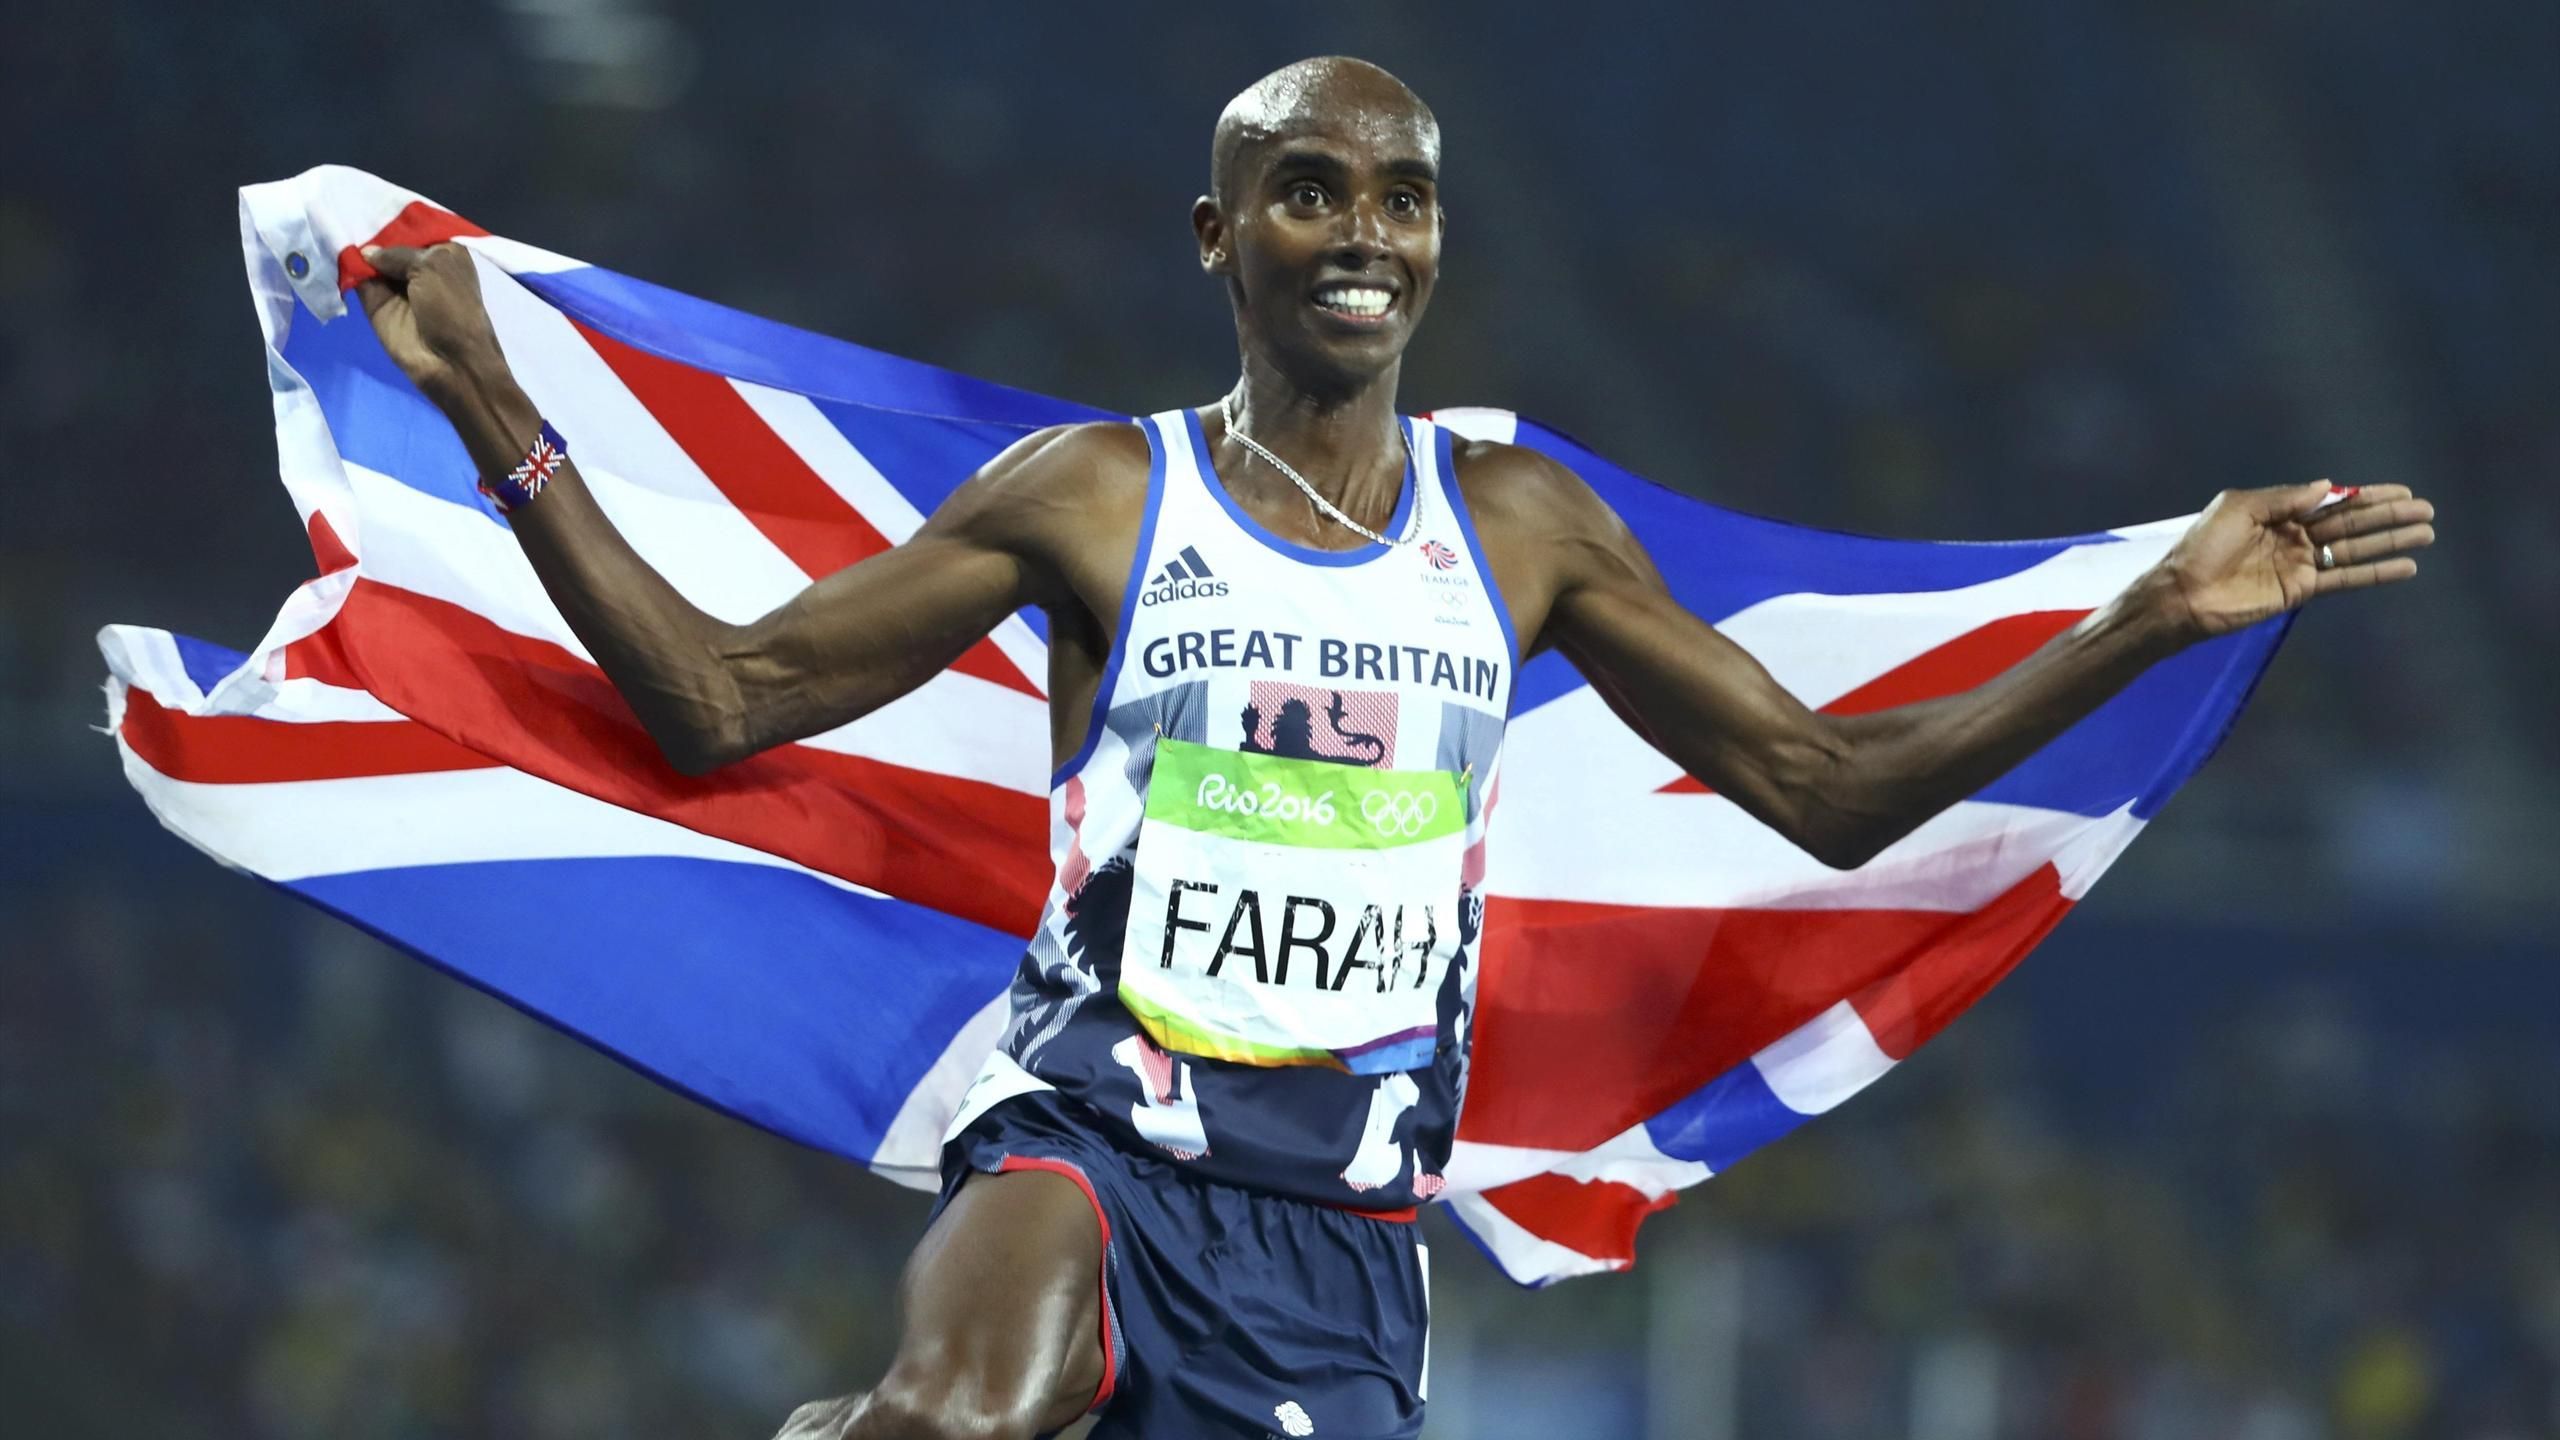 Olympics Rio 2016: Mo Farah wins 'double double' after 5000m